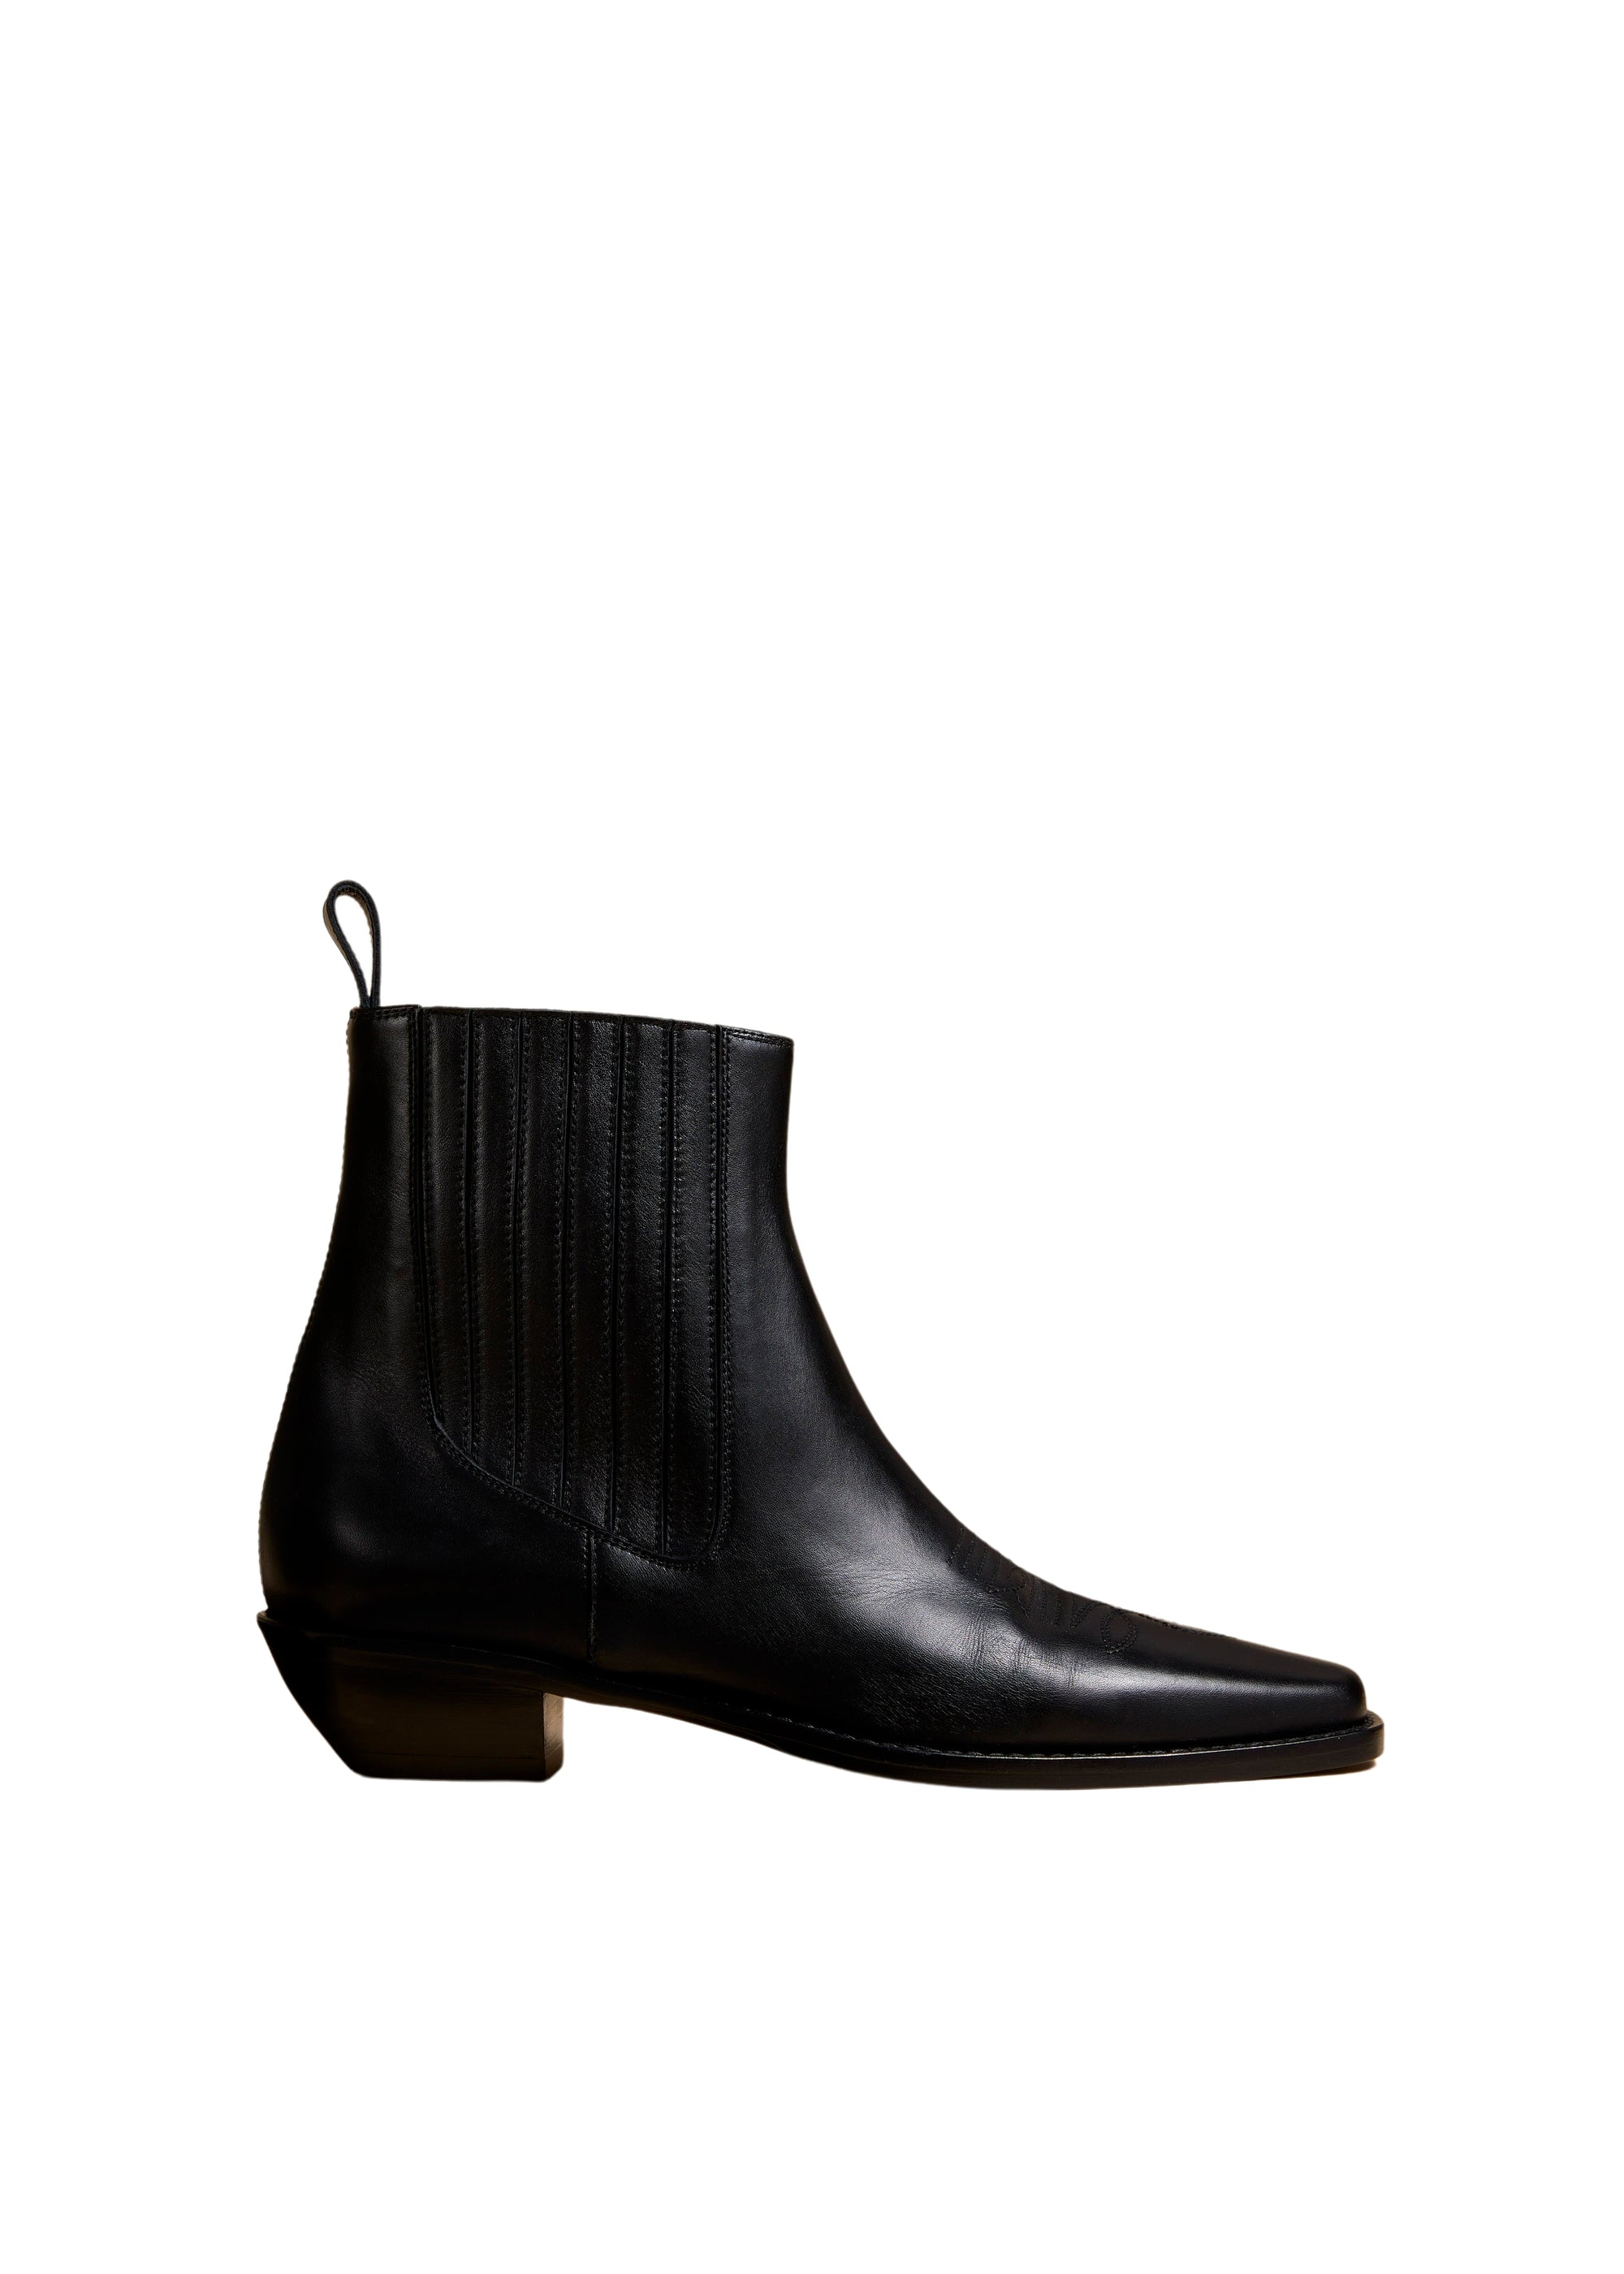 Henry boot in leather - Black